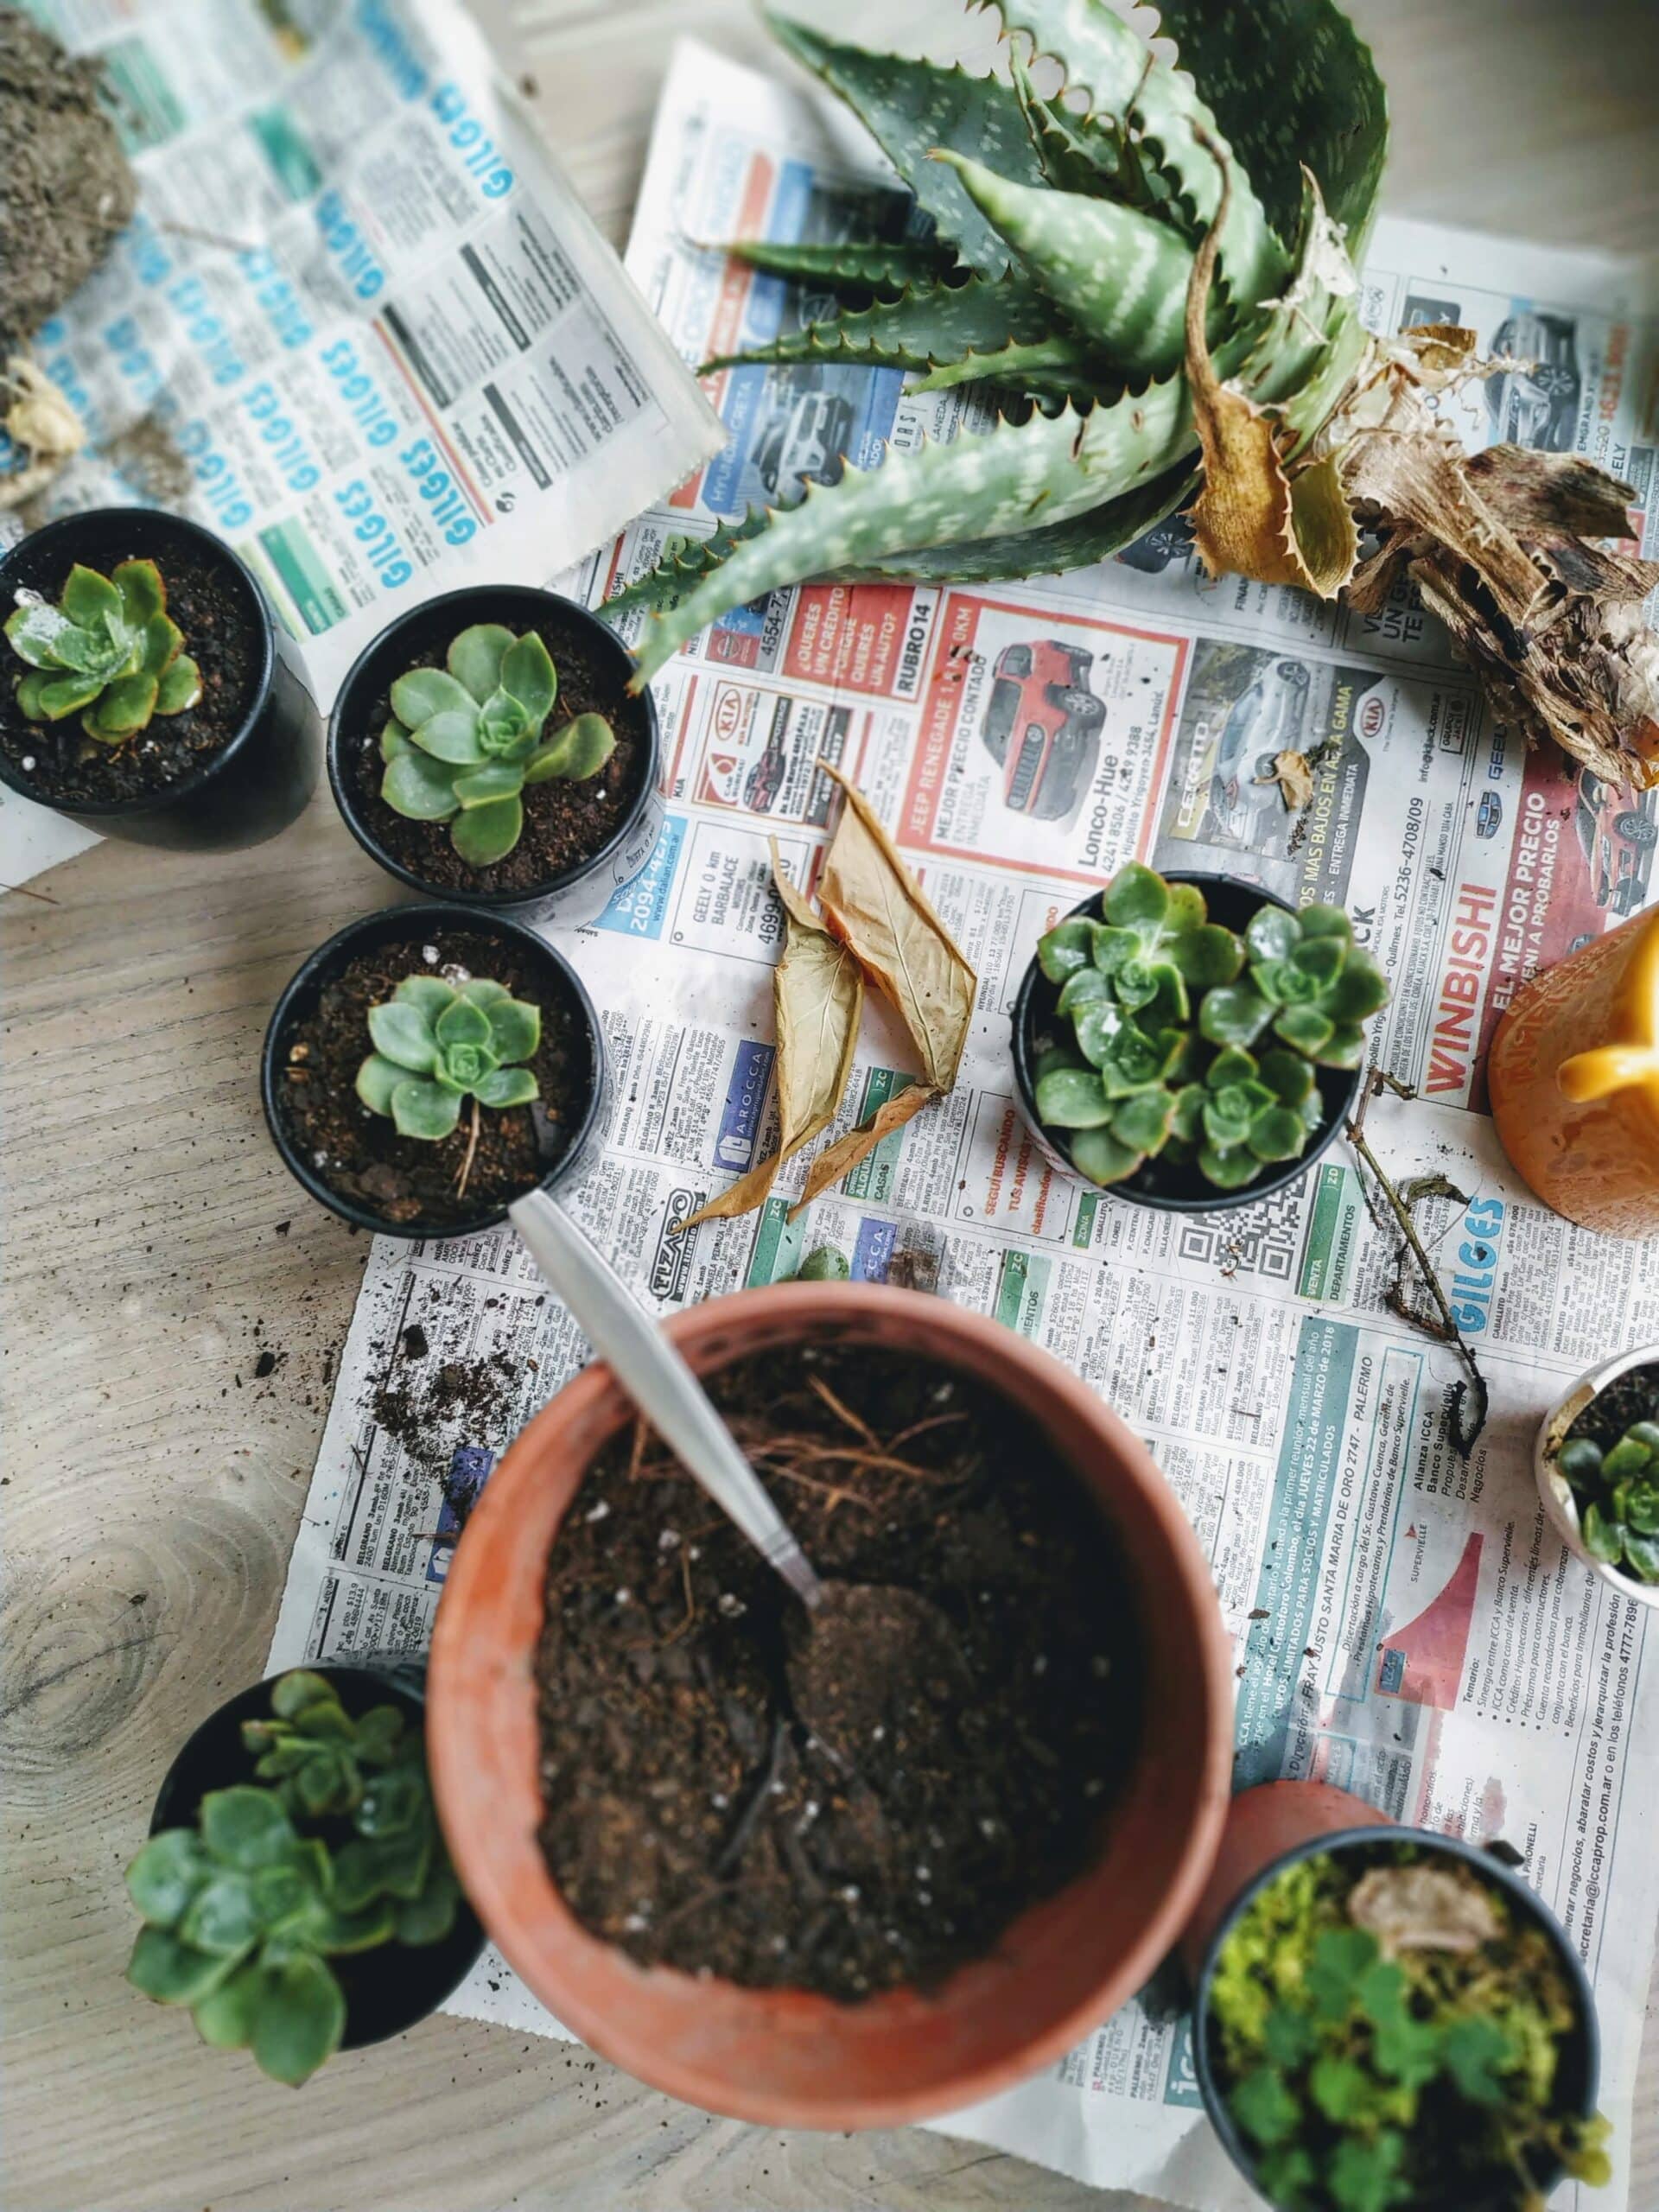 how to propagate succulents